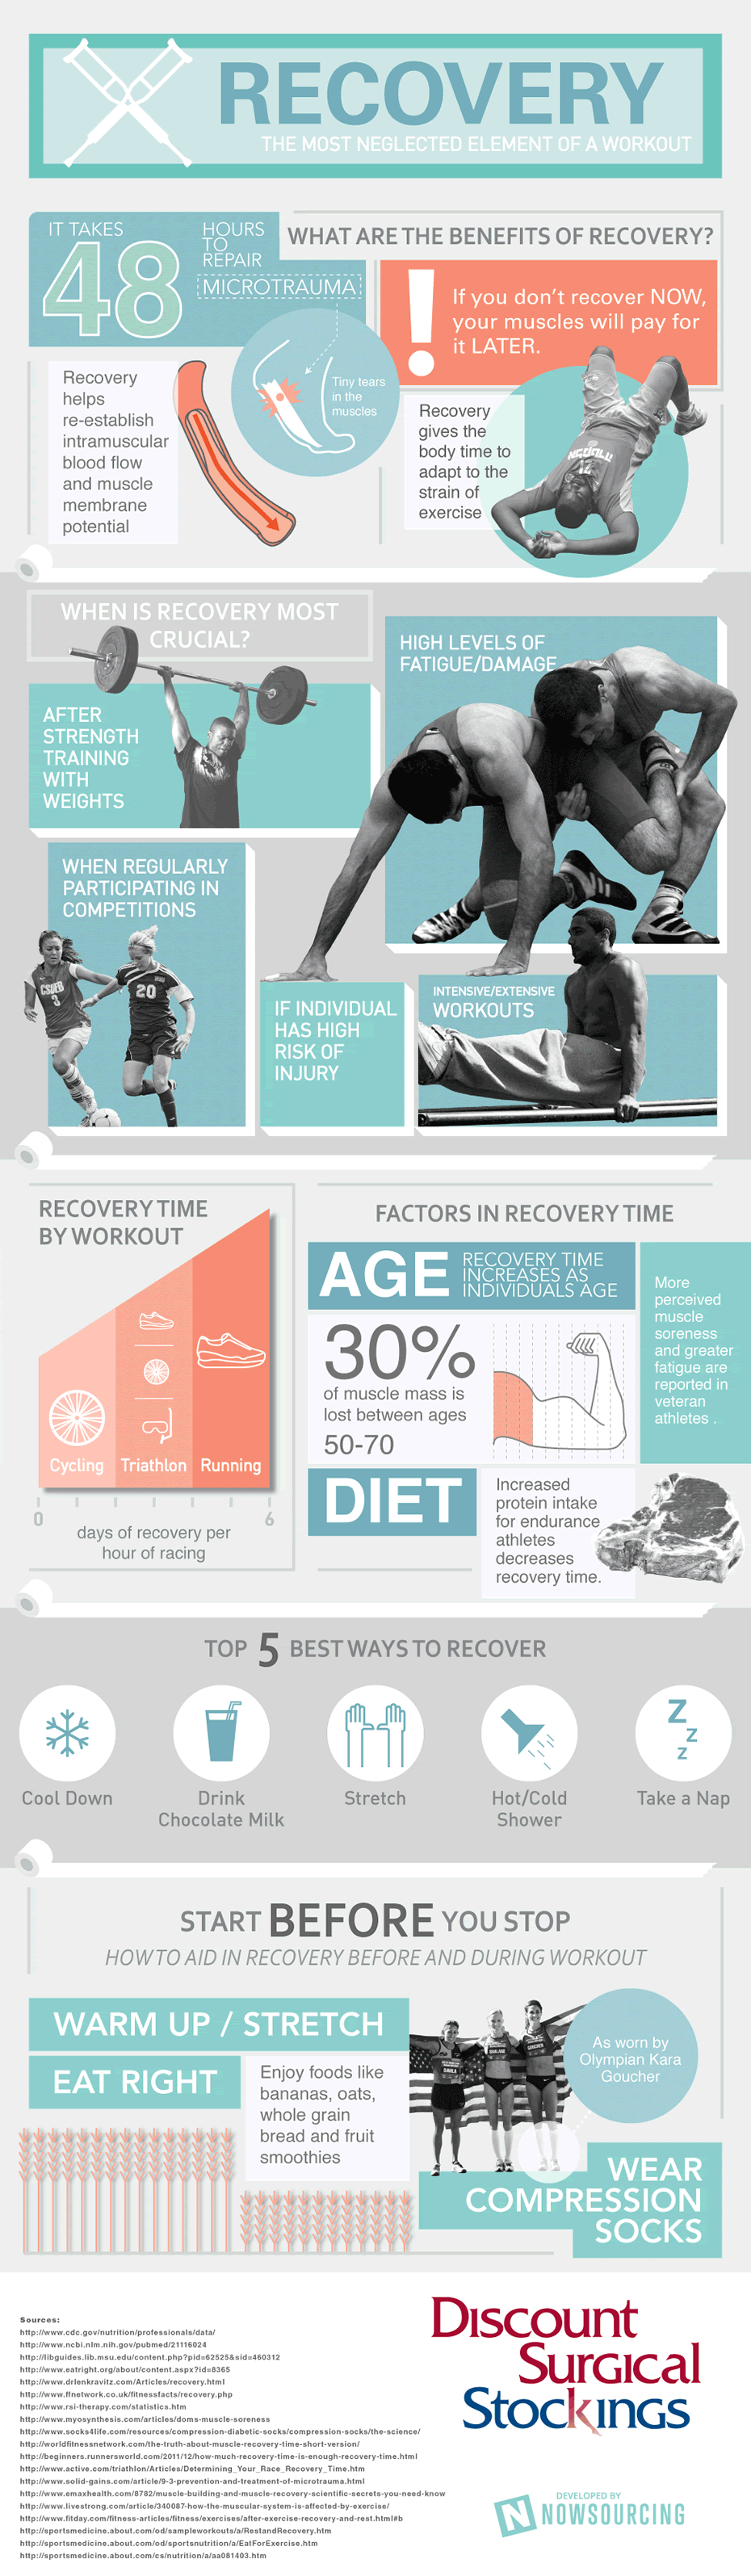 Recovery: The Most Neglected Element of a Workout